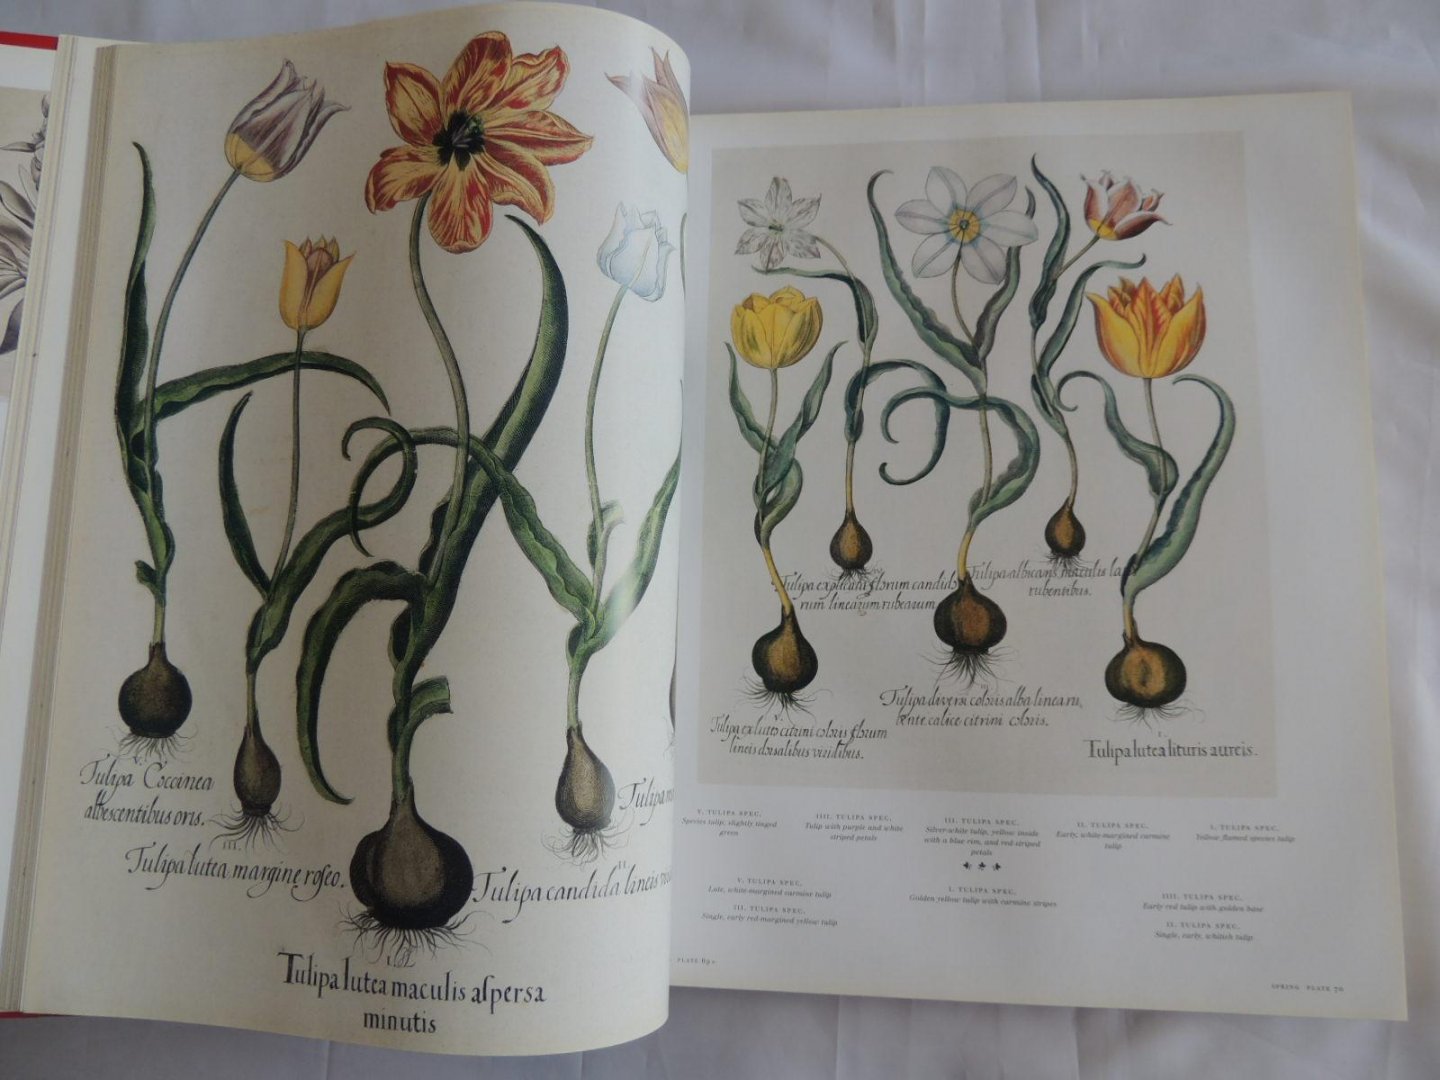 Besler, Basilius - The Book of Plants. The Complete Plates.